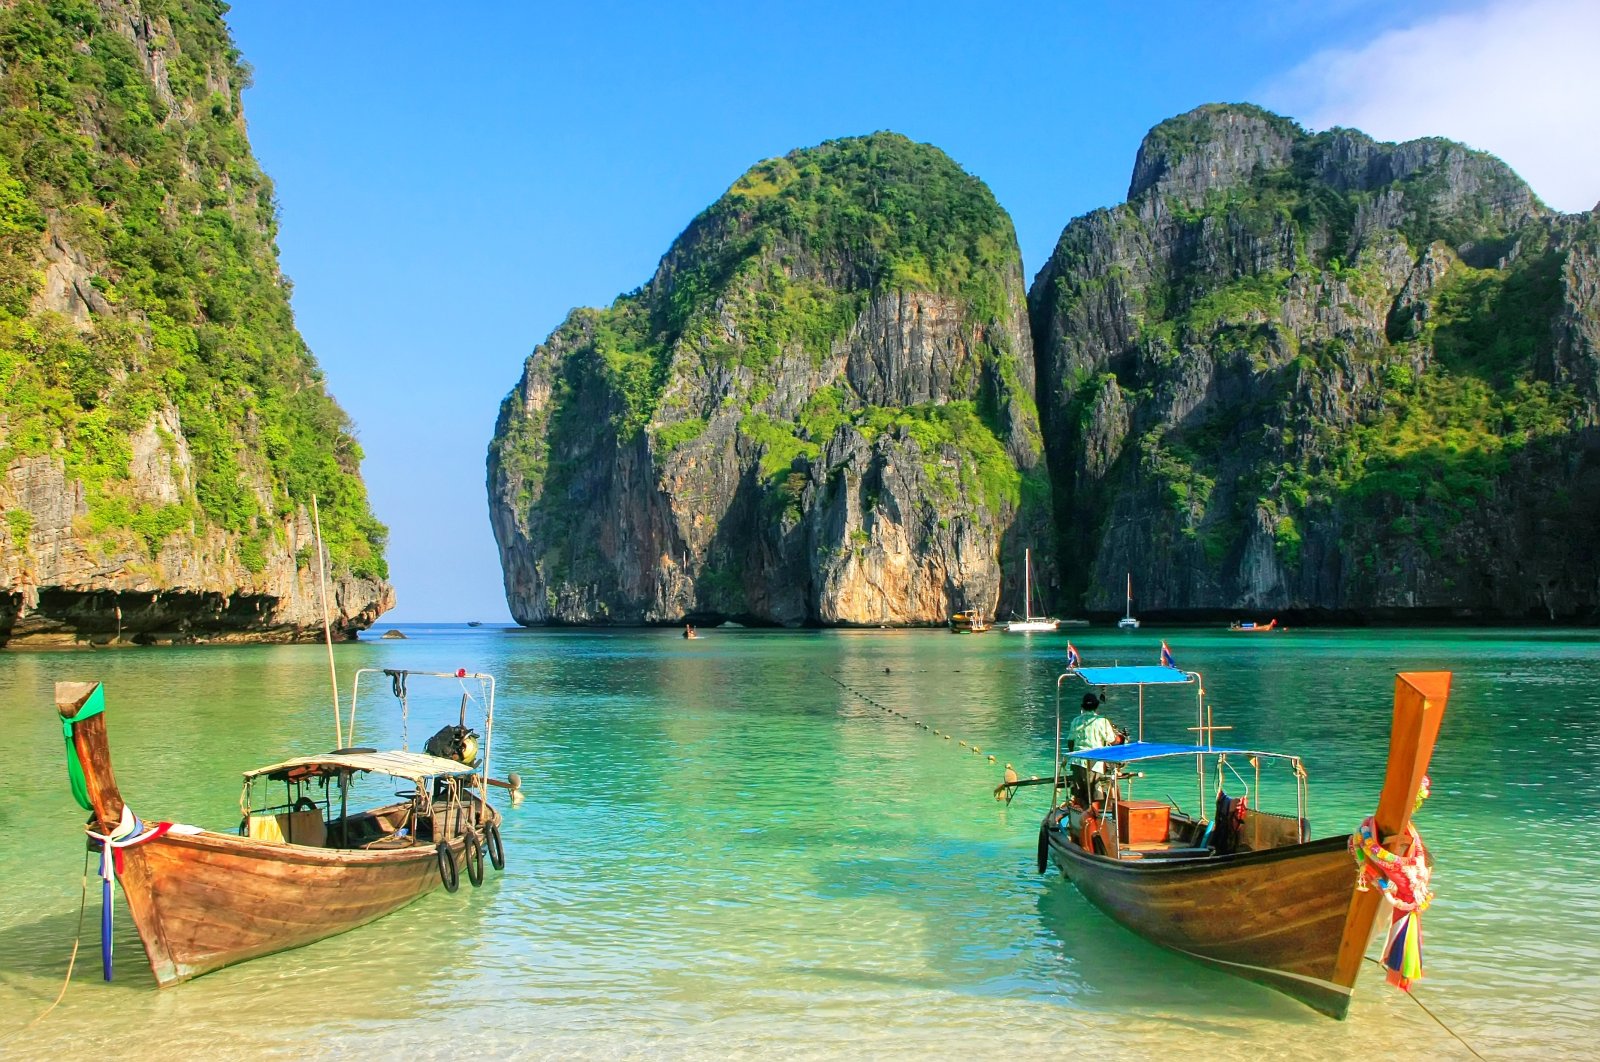 Over-tourism in Maya Bay in Thailand led to massive coral damage after the area was made famous by the 2000 film &quot;The Beach.&quot; (Shutterstock Photo)